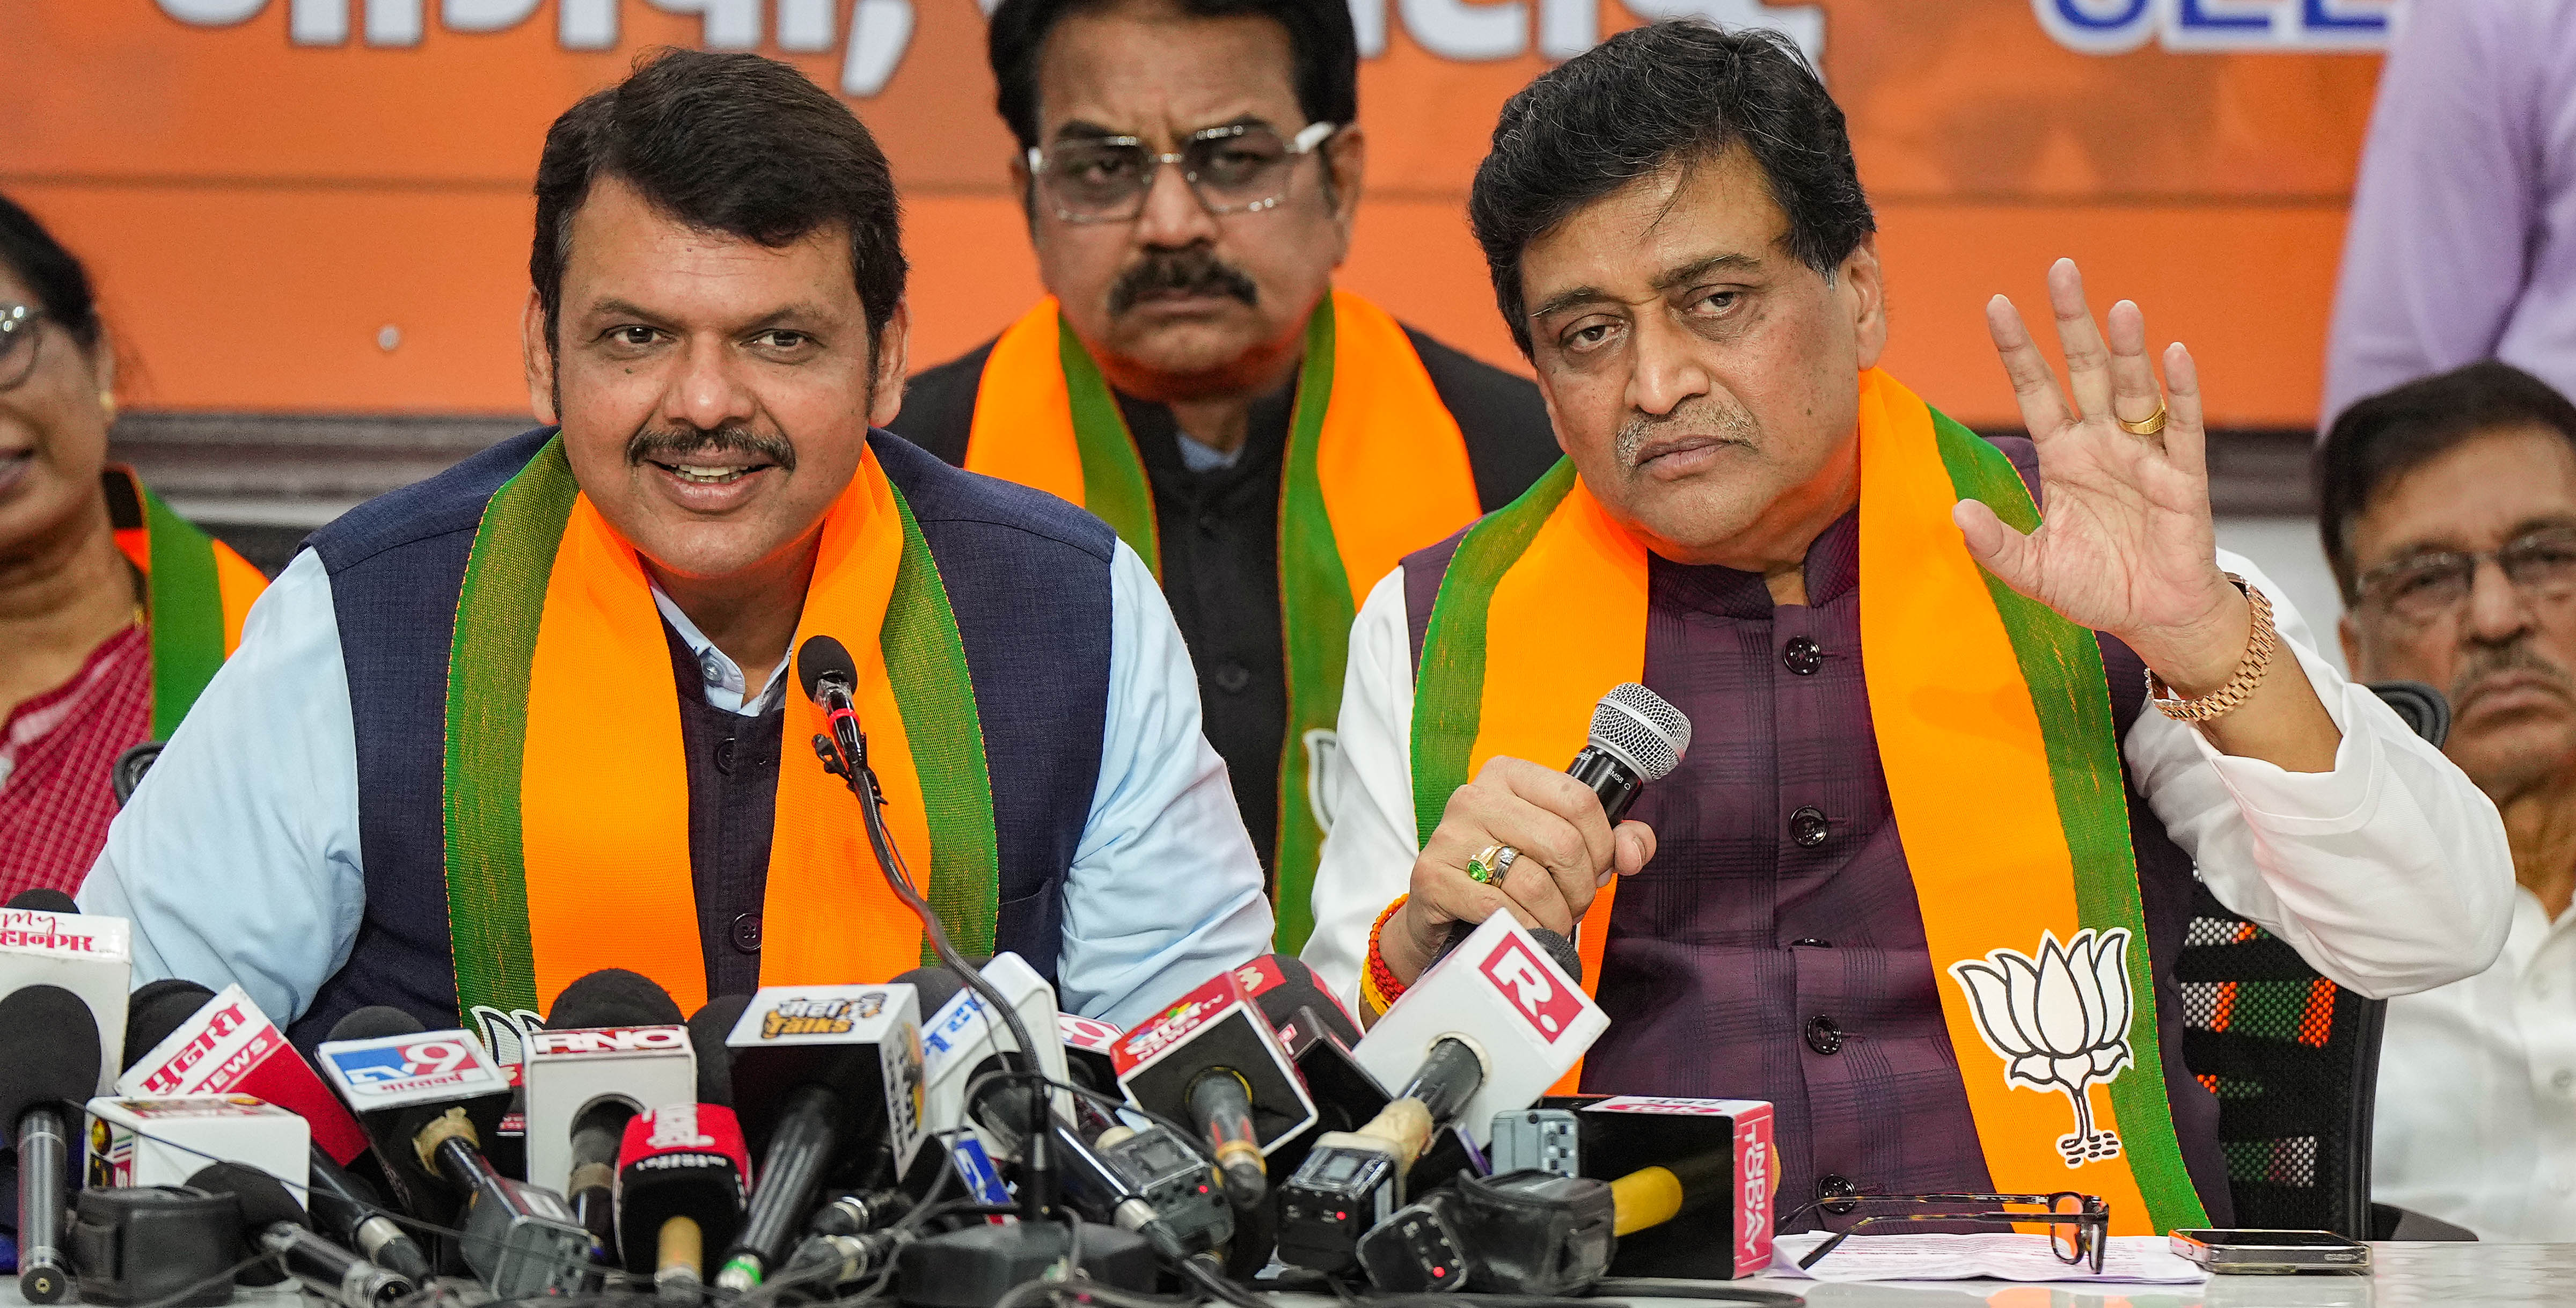 chavan was supposed to fight, but he chose to quit the battlefield: chennithala